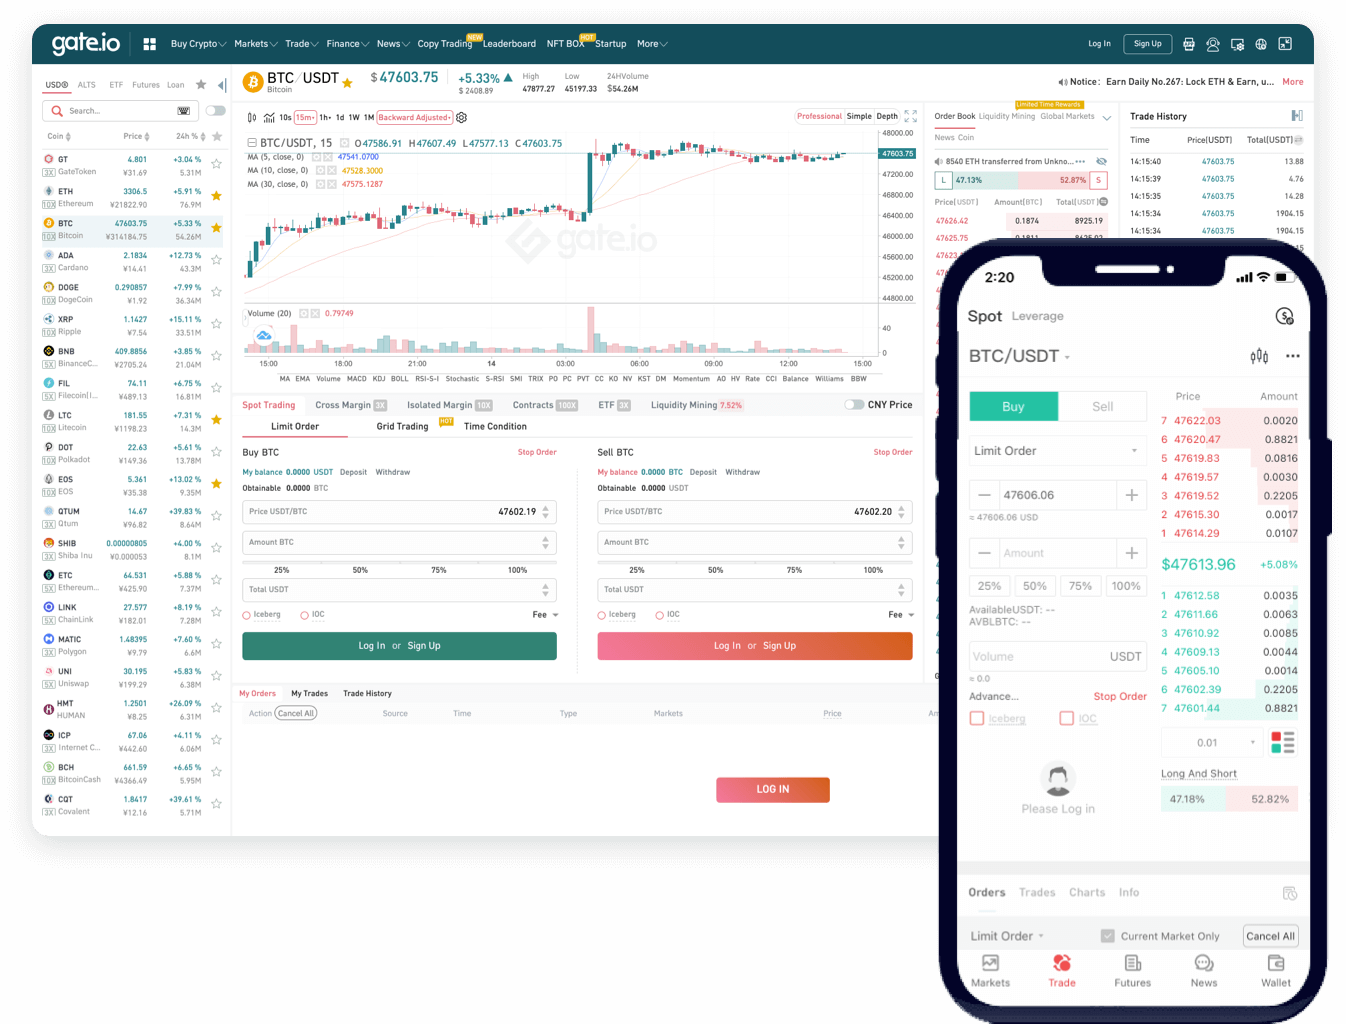 Trading with Gate.io: Margin trading and derivatives